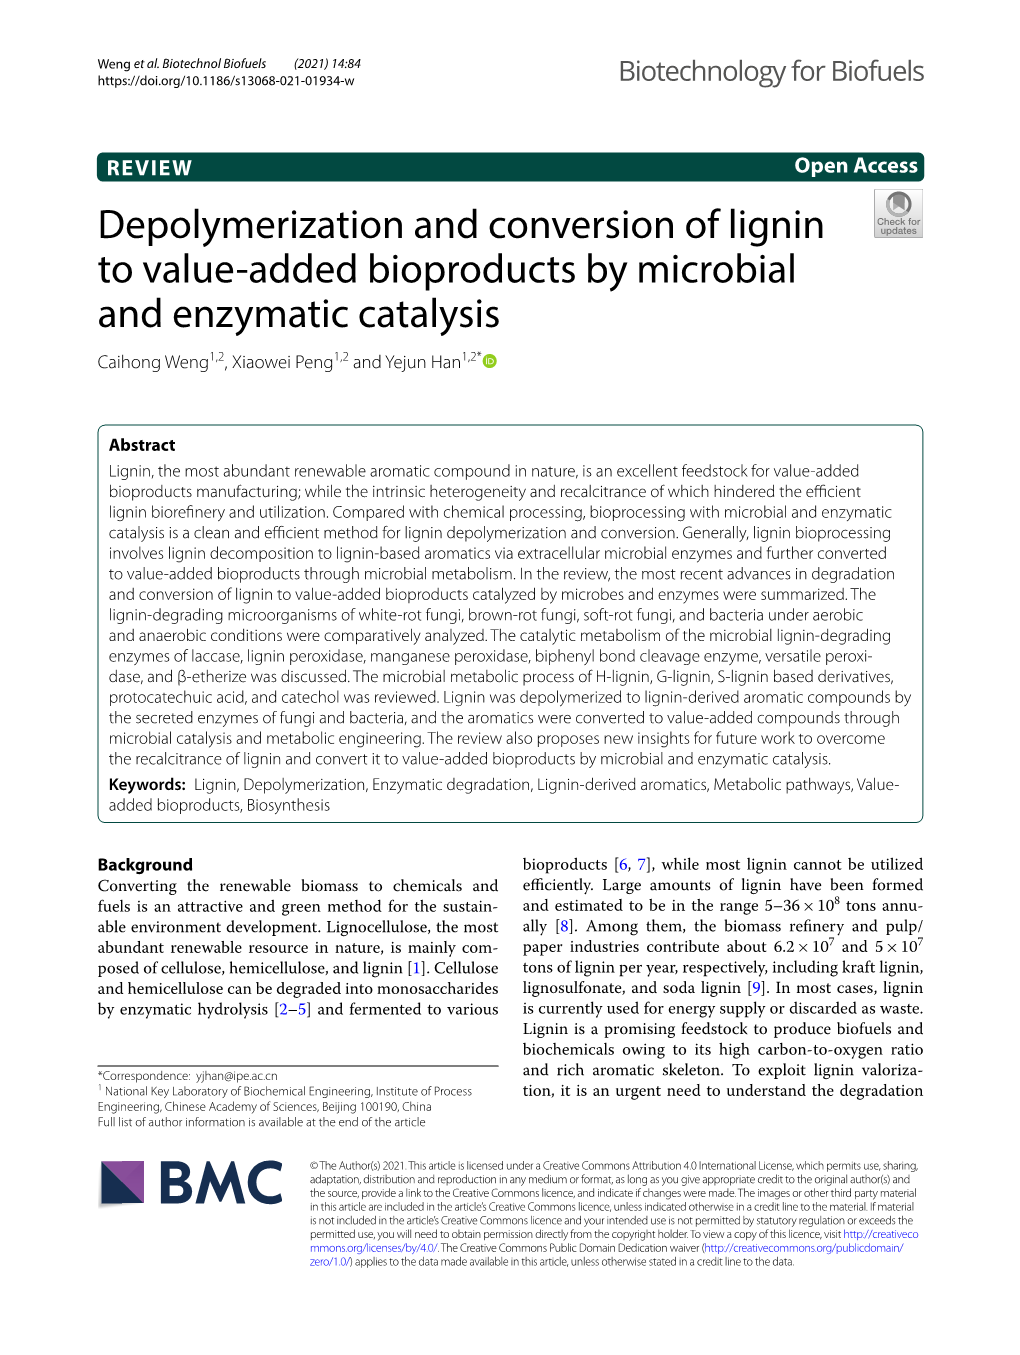 Depolymerization and Conversion of Lignin to Value-Added Bioproducts